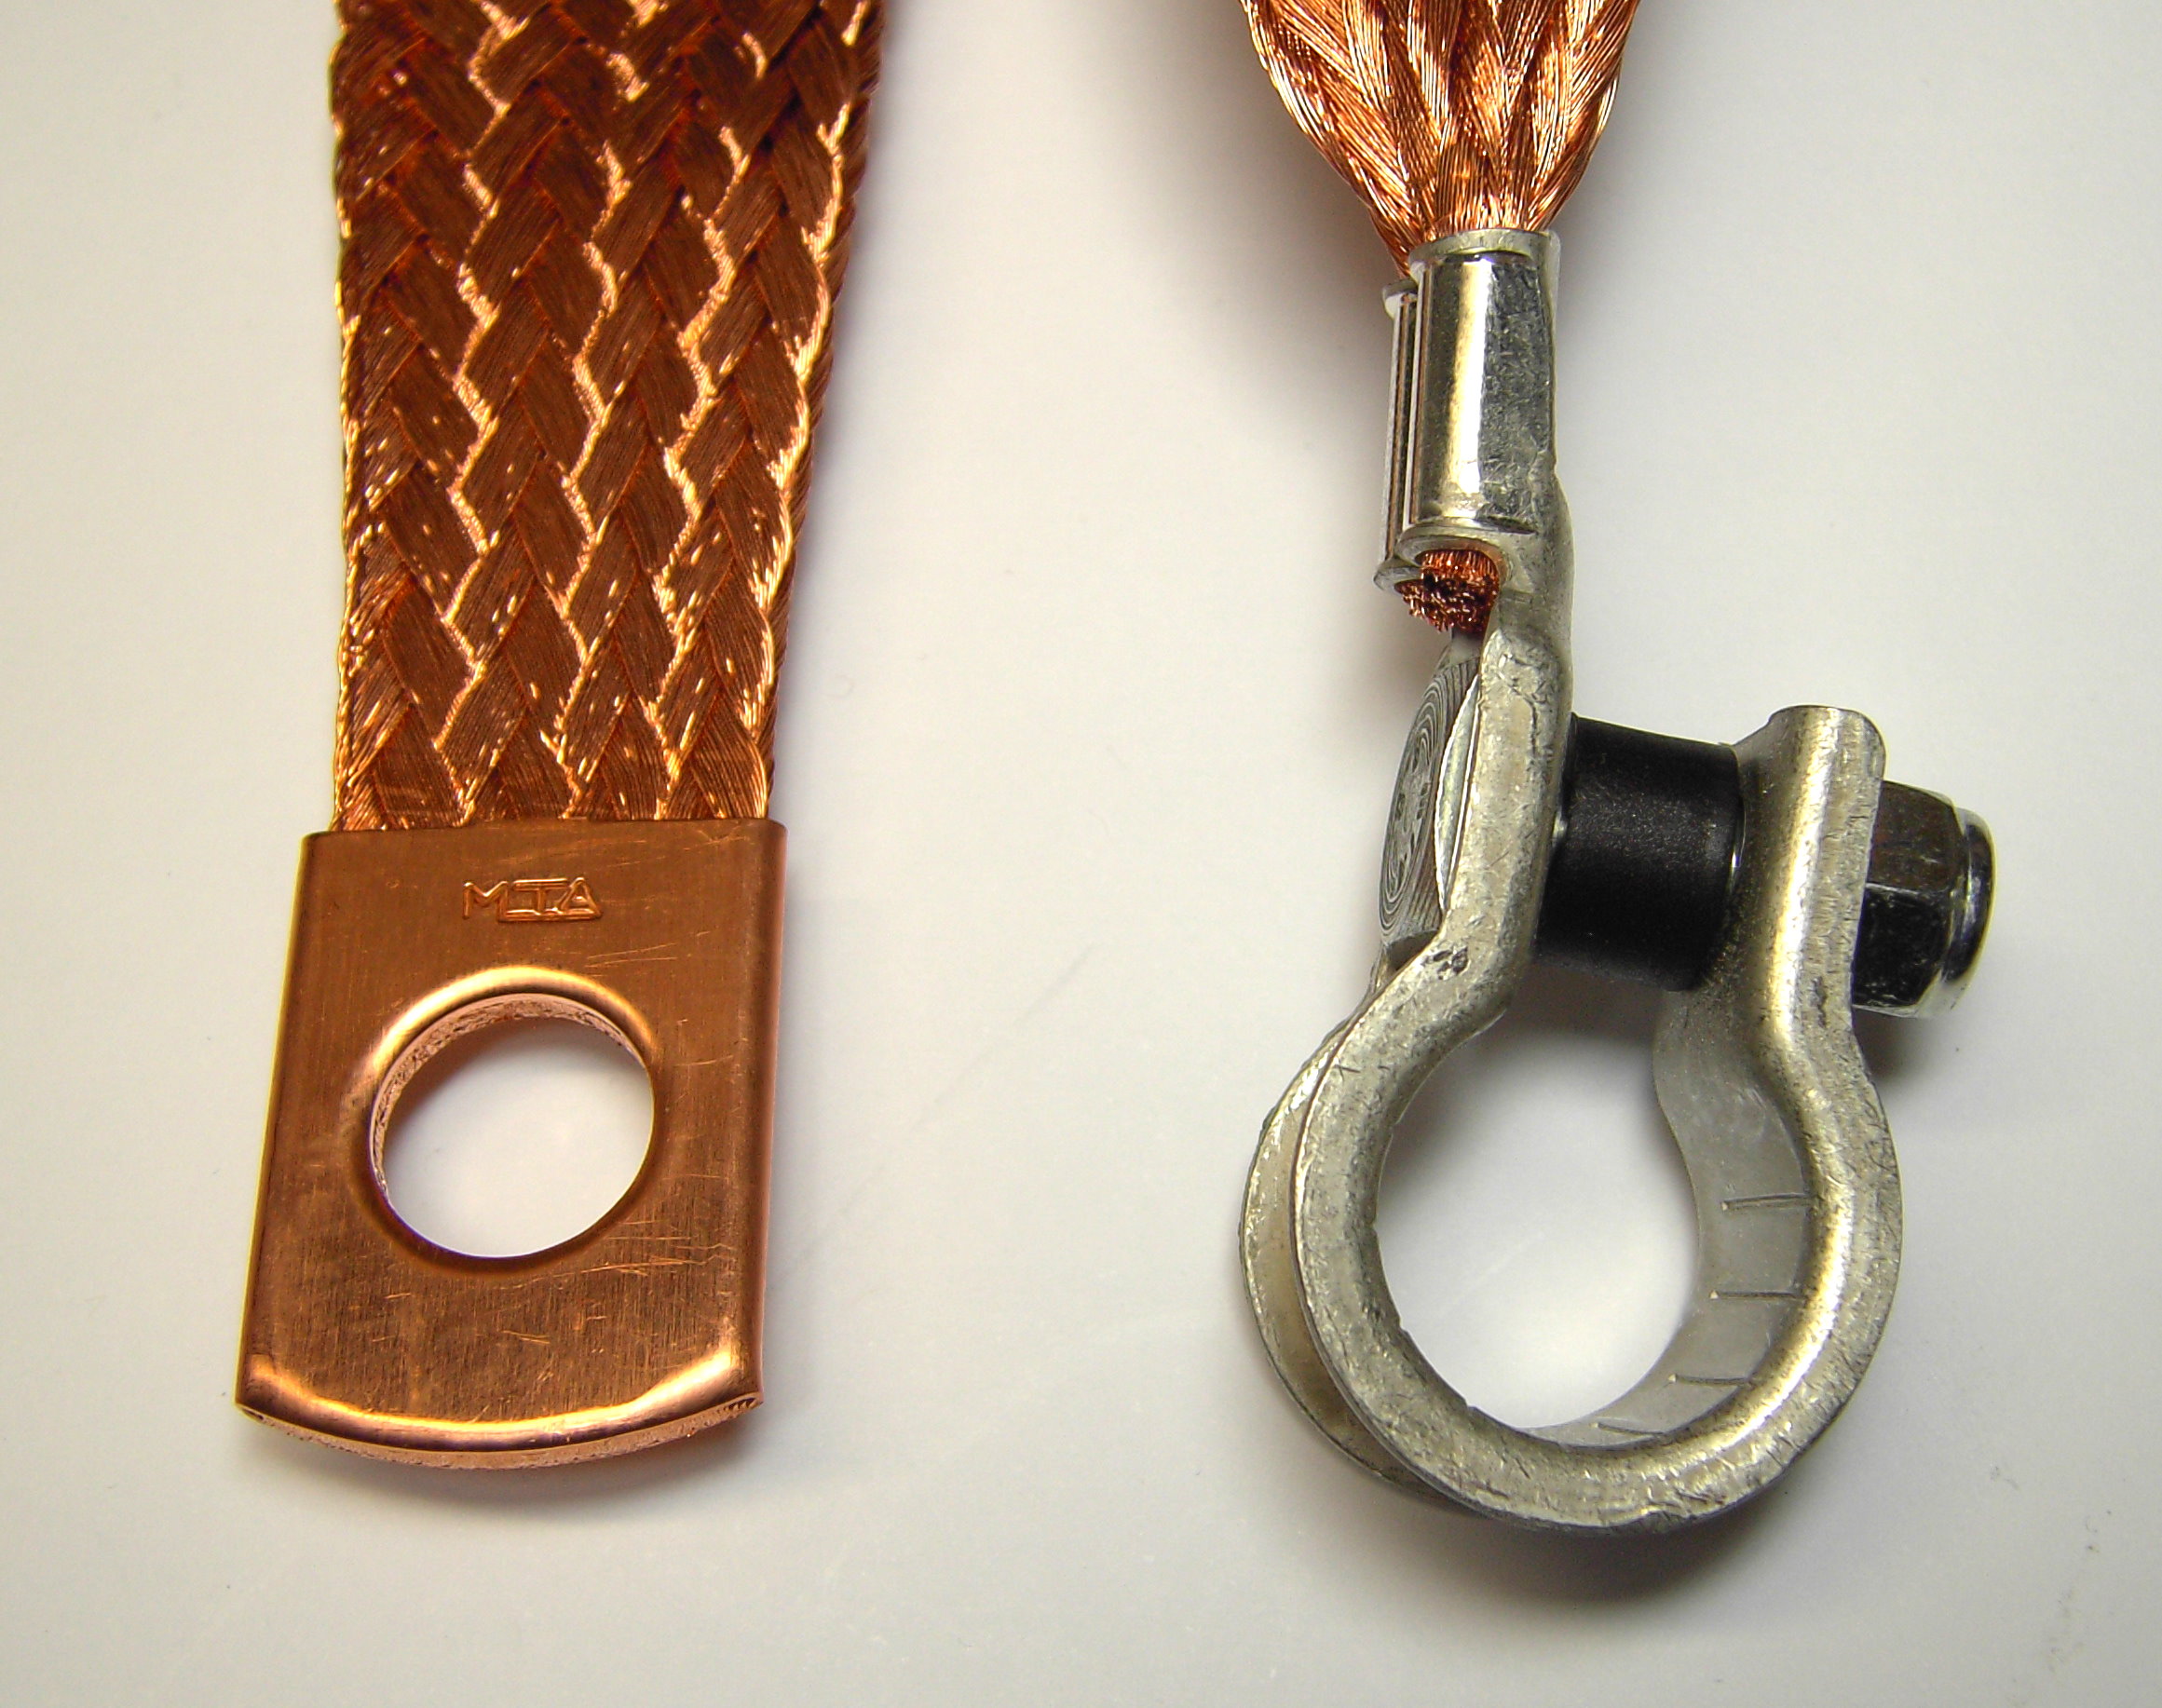 earthingstrap + pole clamp 25mm